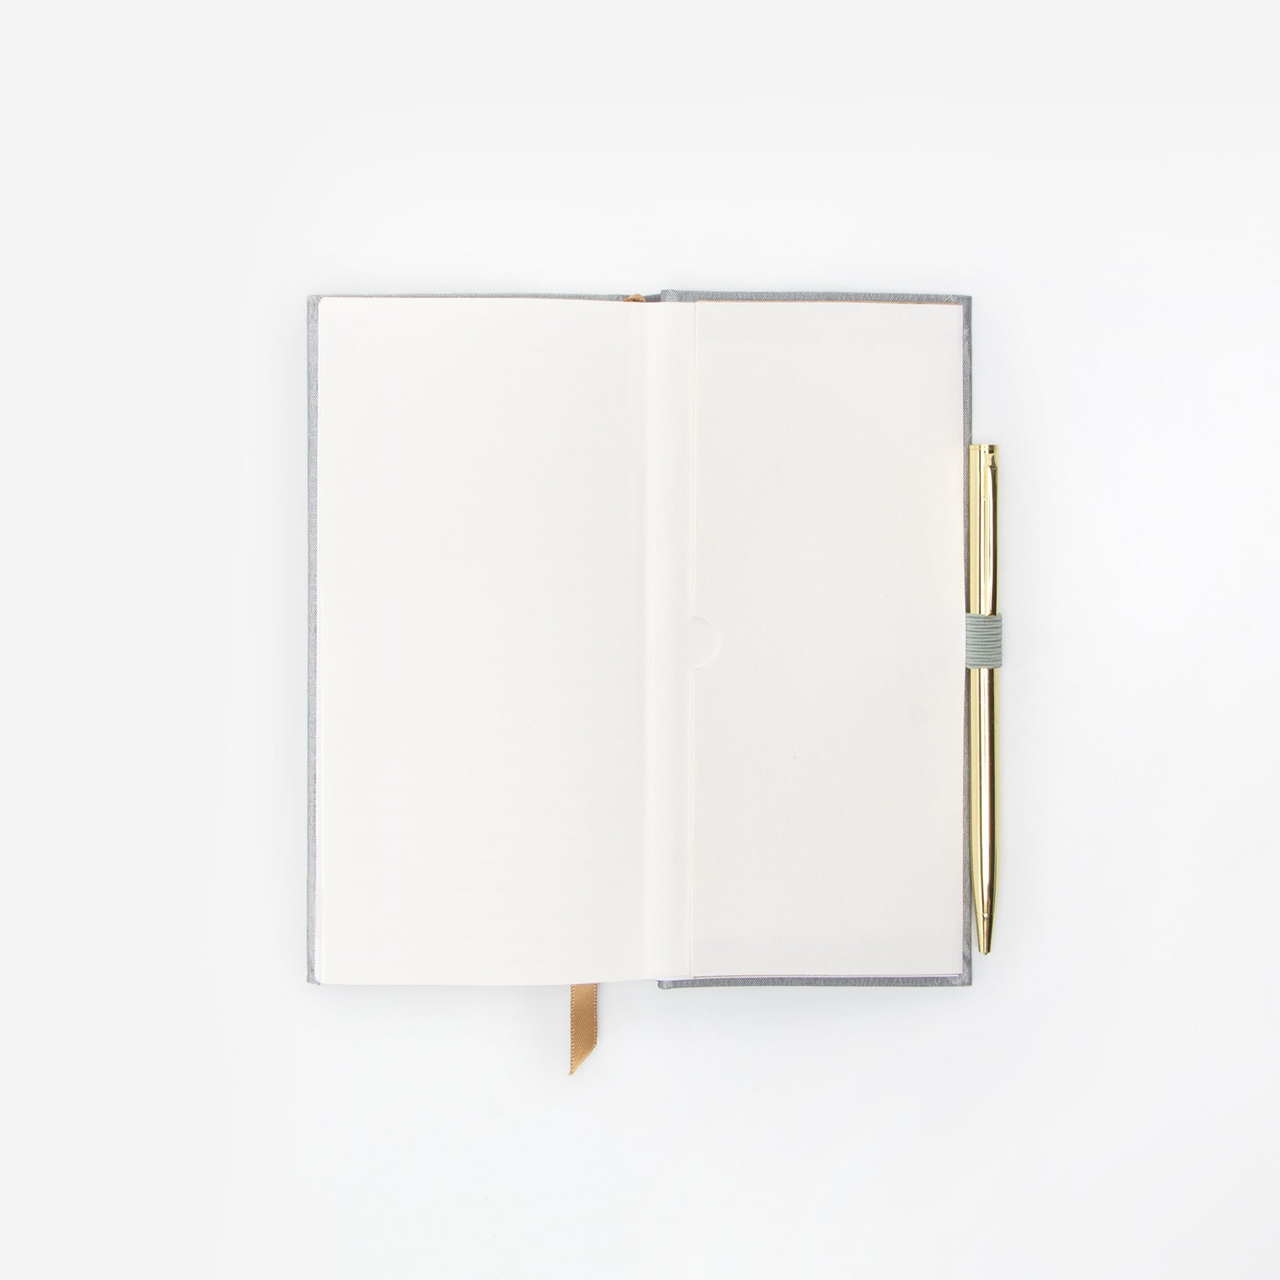 SKINNY JOURNALS WITH PEN | "TALL TALES"